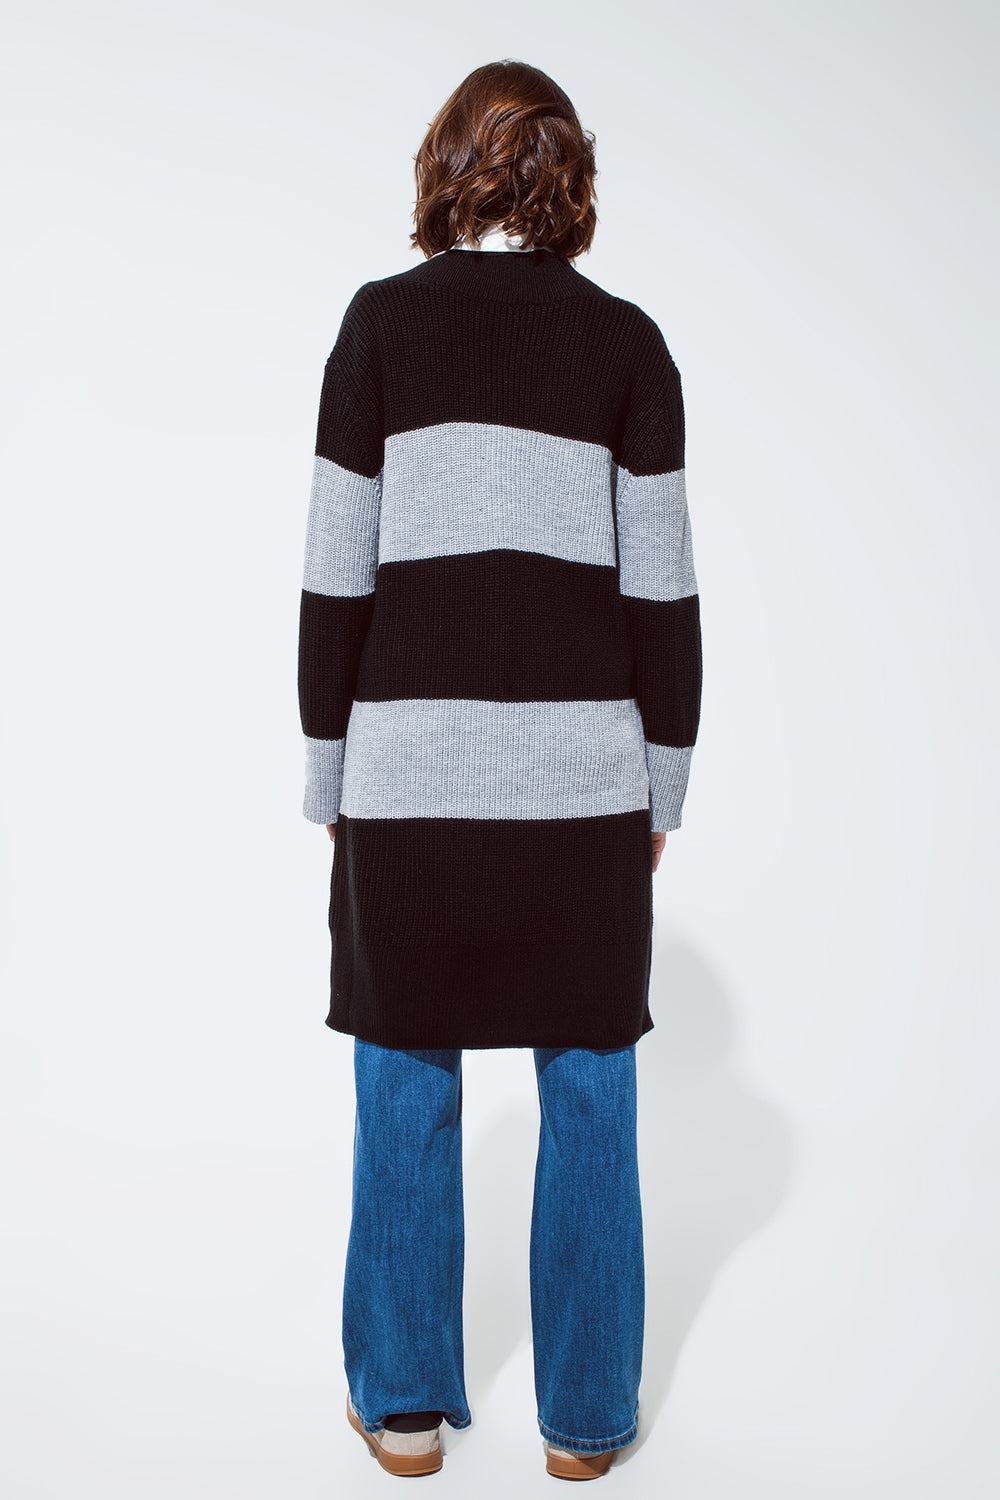 Oversized MIDI knitted dress with stripes and a wide v neck